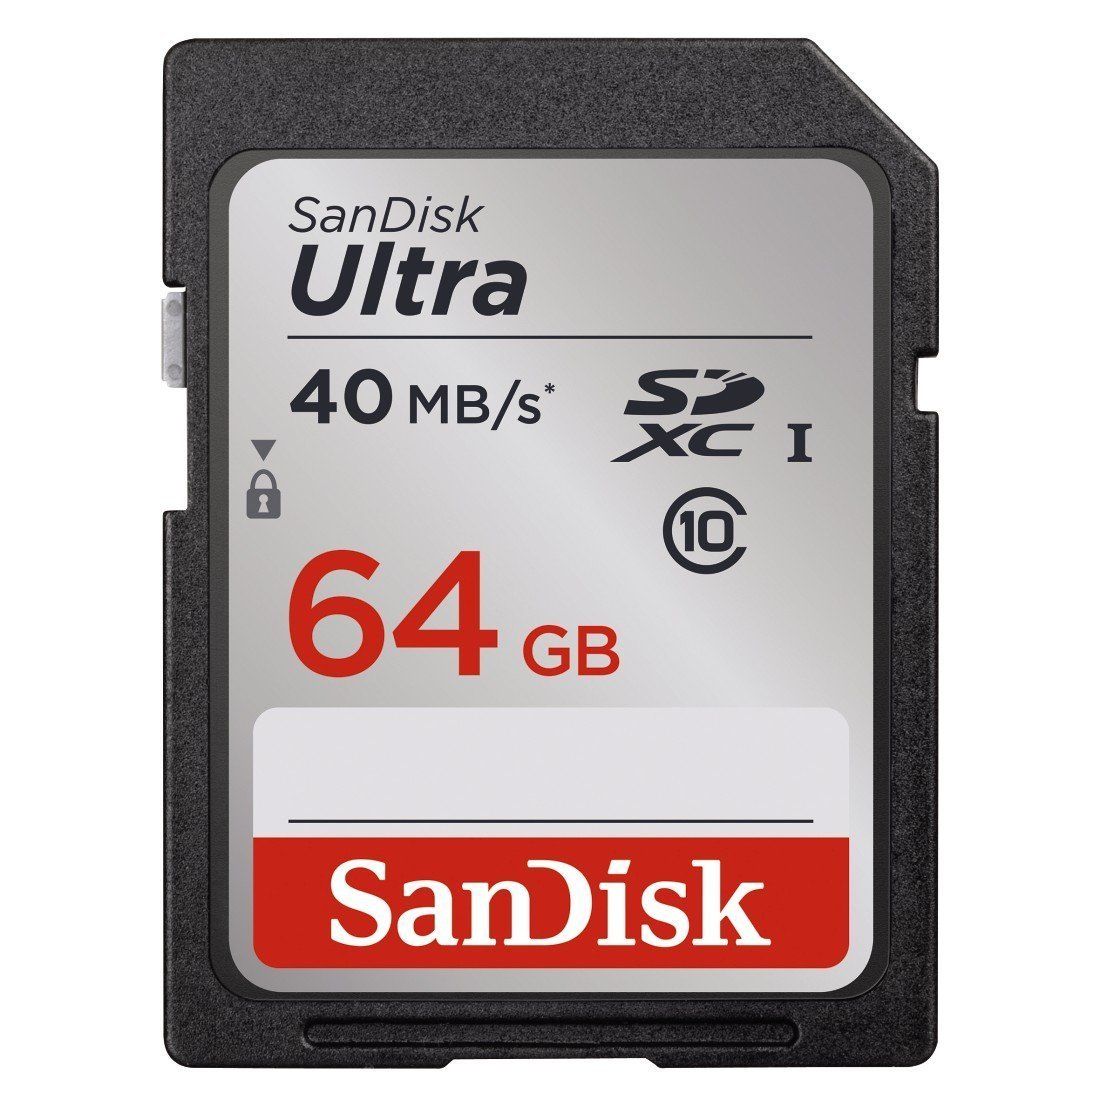 sdxc memory card not reading in sdxc camcorder